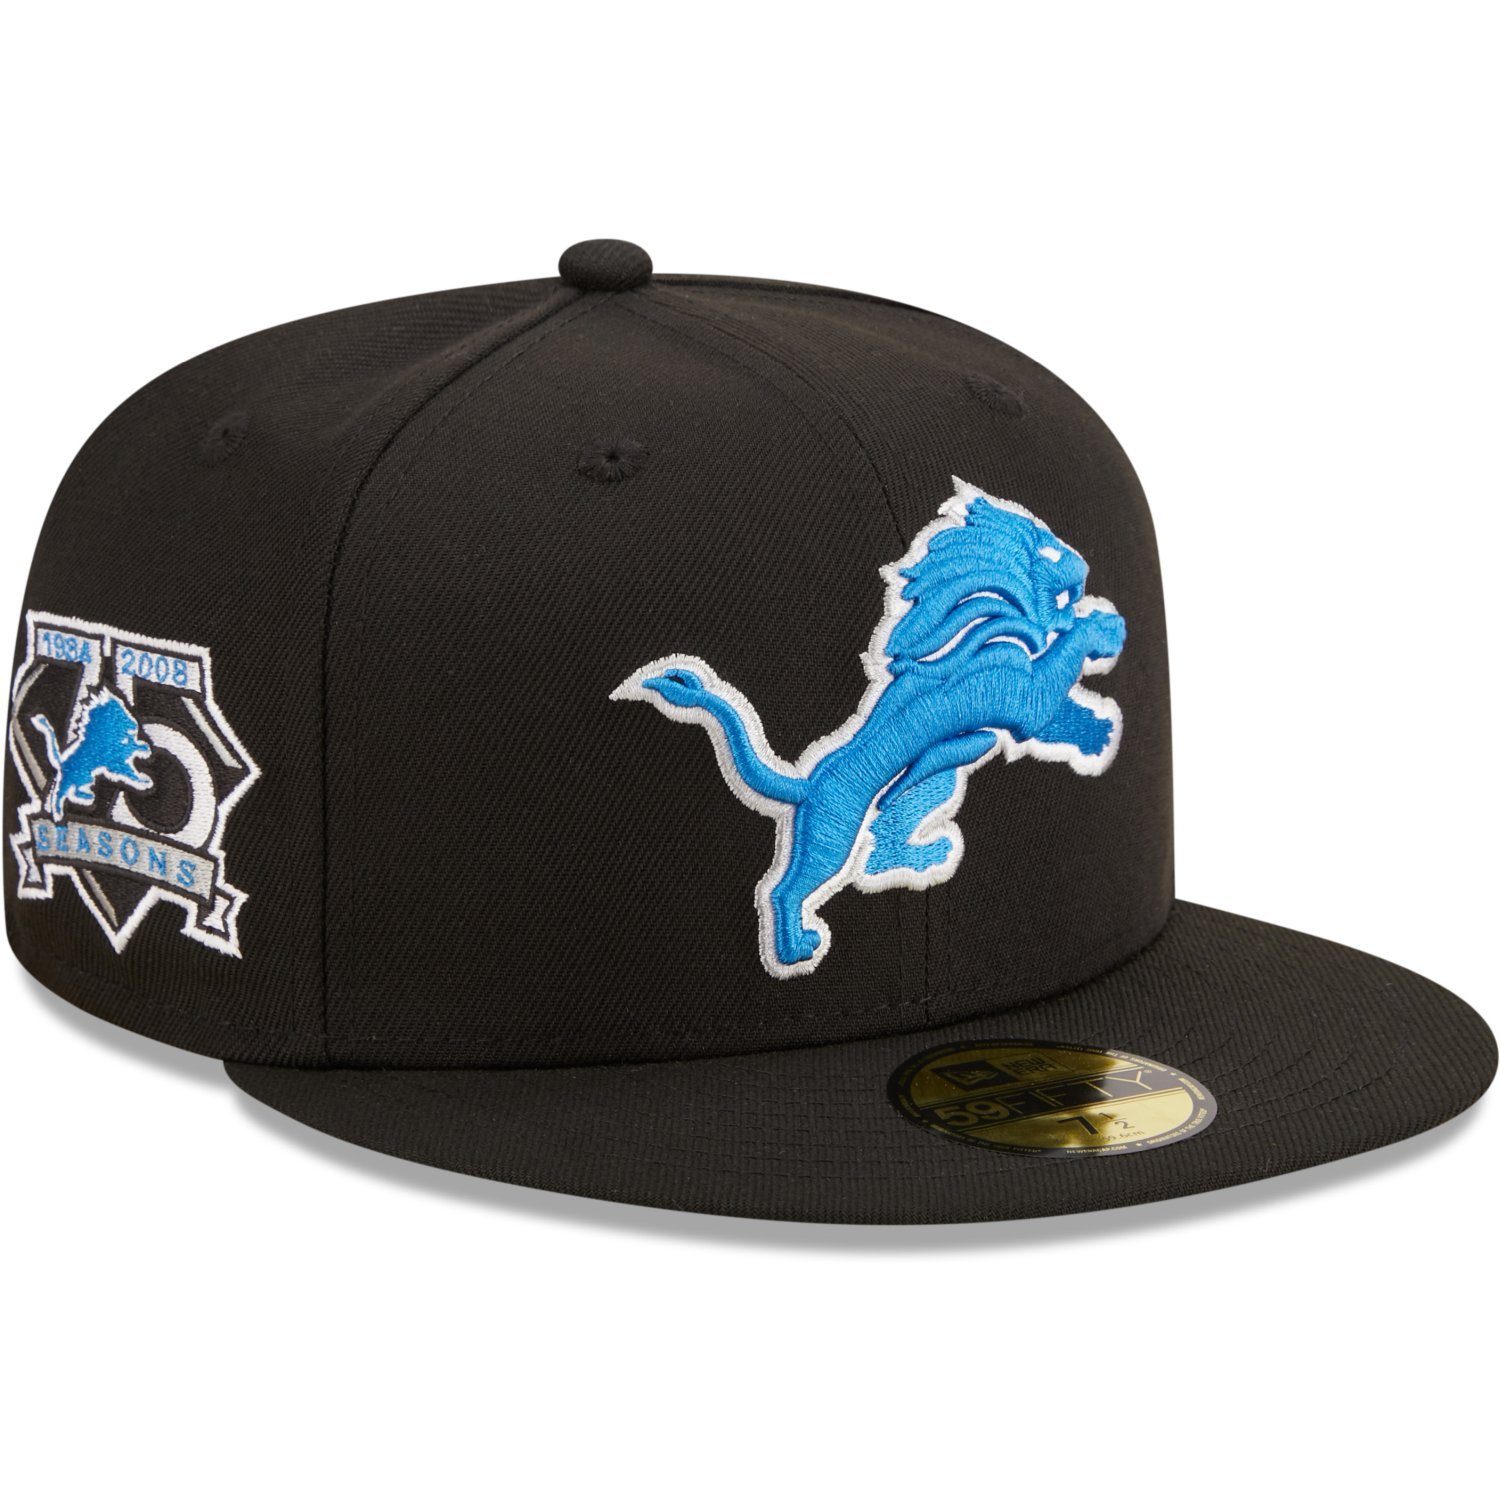 Cap Lions Seasons Detroit 75 New Fitted 59Fifty Era